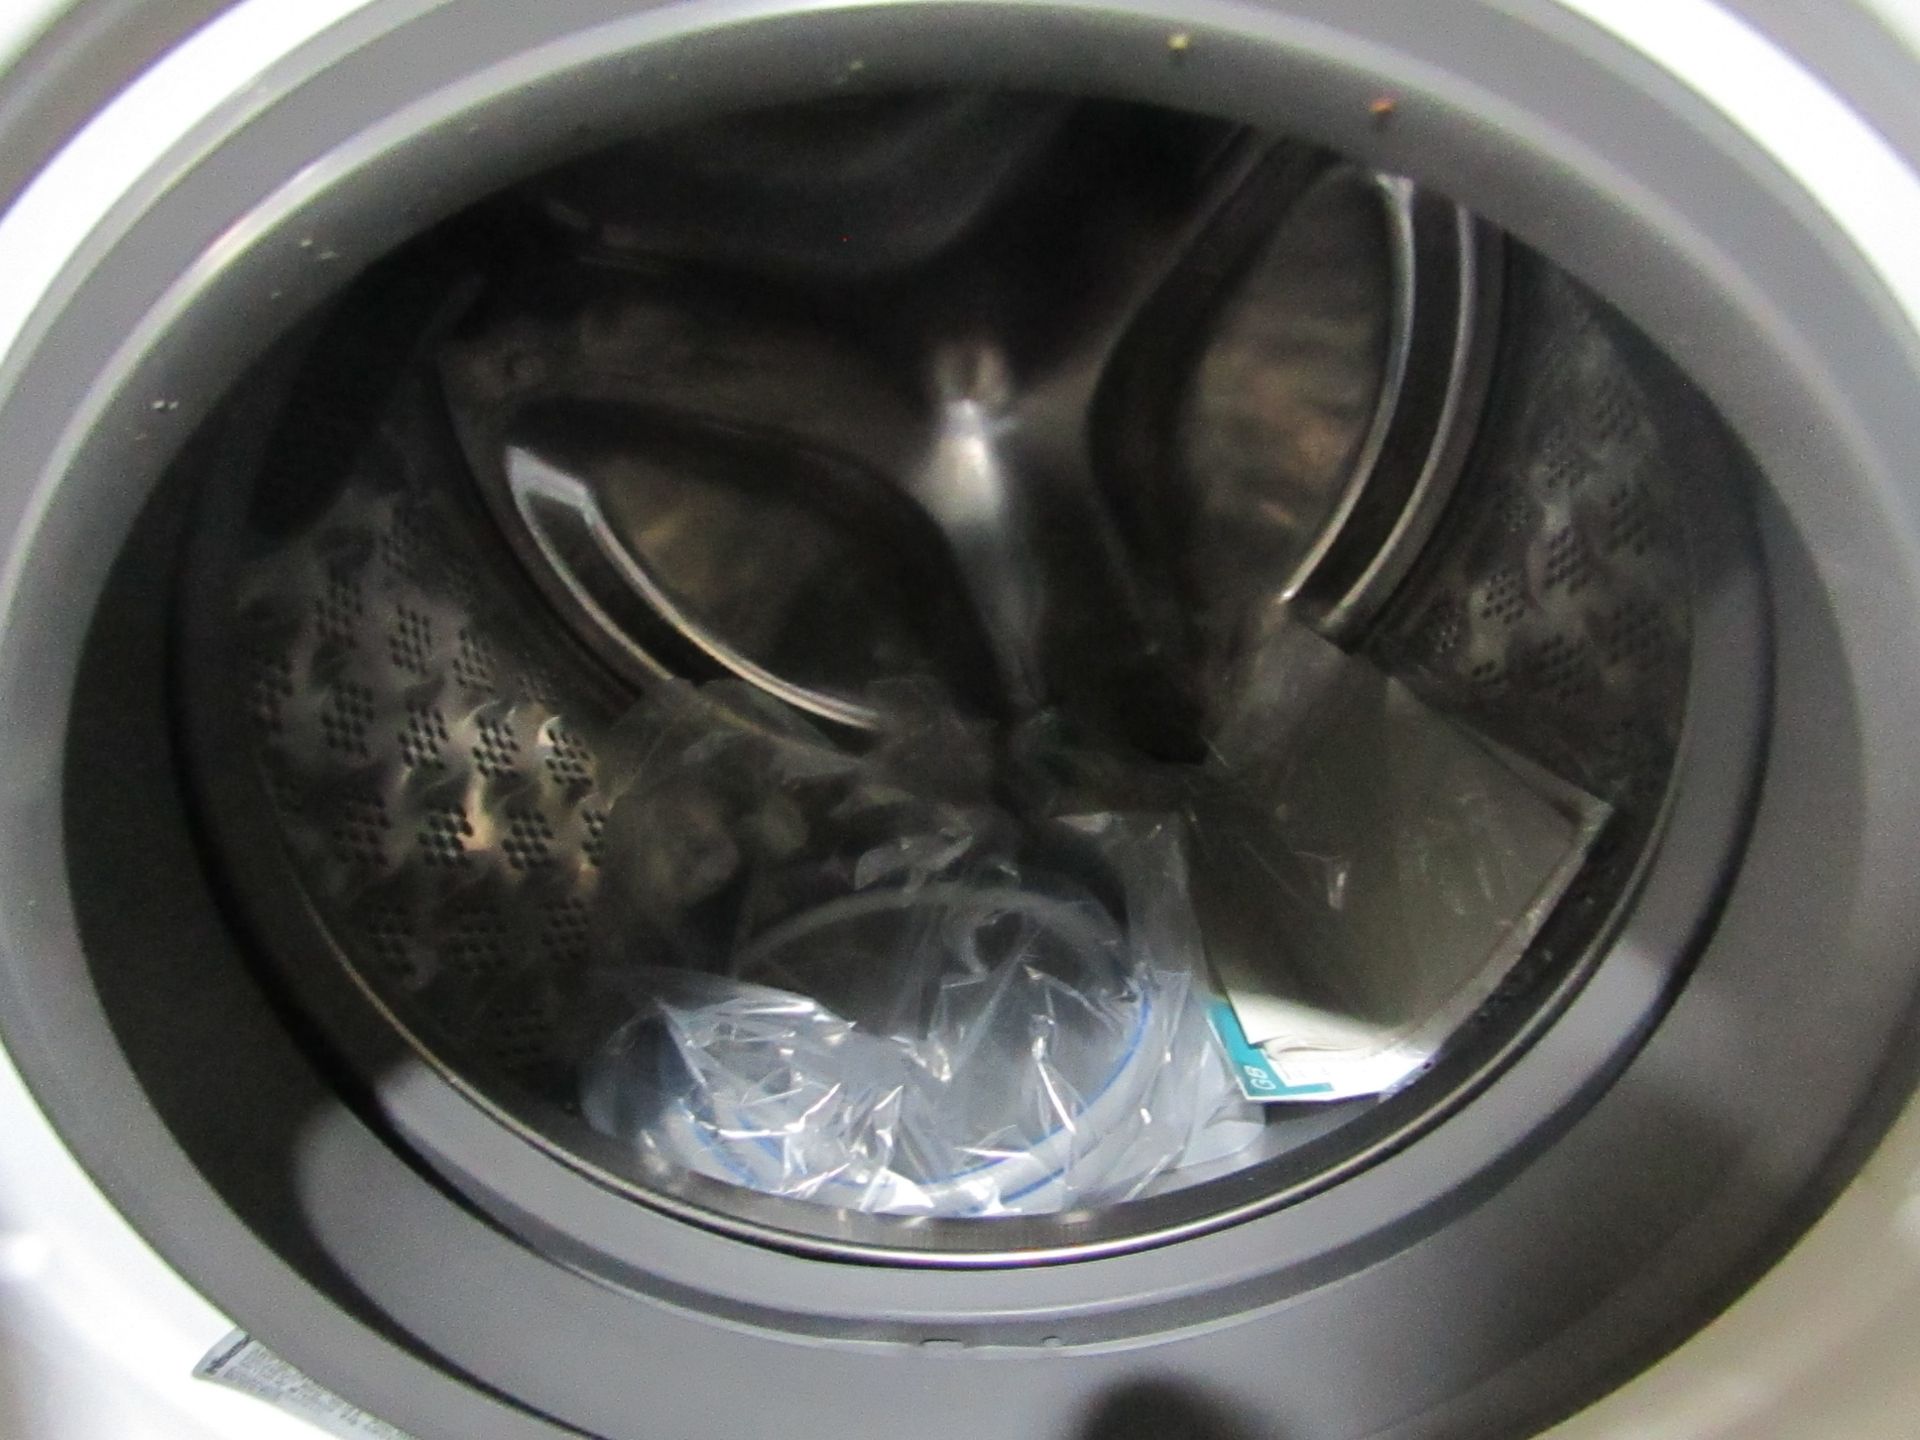 Hisense, Dose Assist washing machine, powers on and spins. - Image 2 of 2